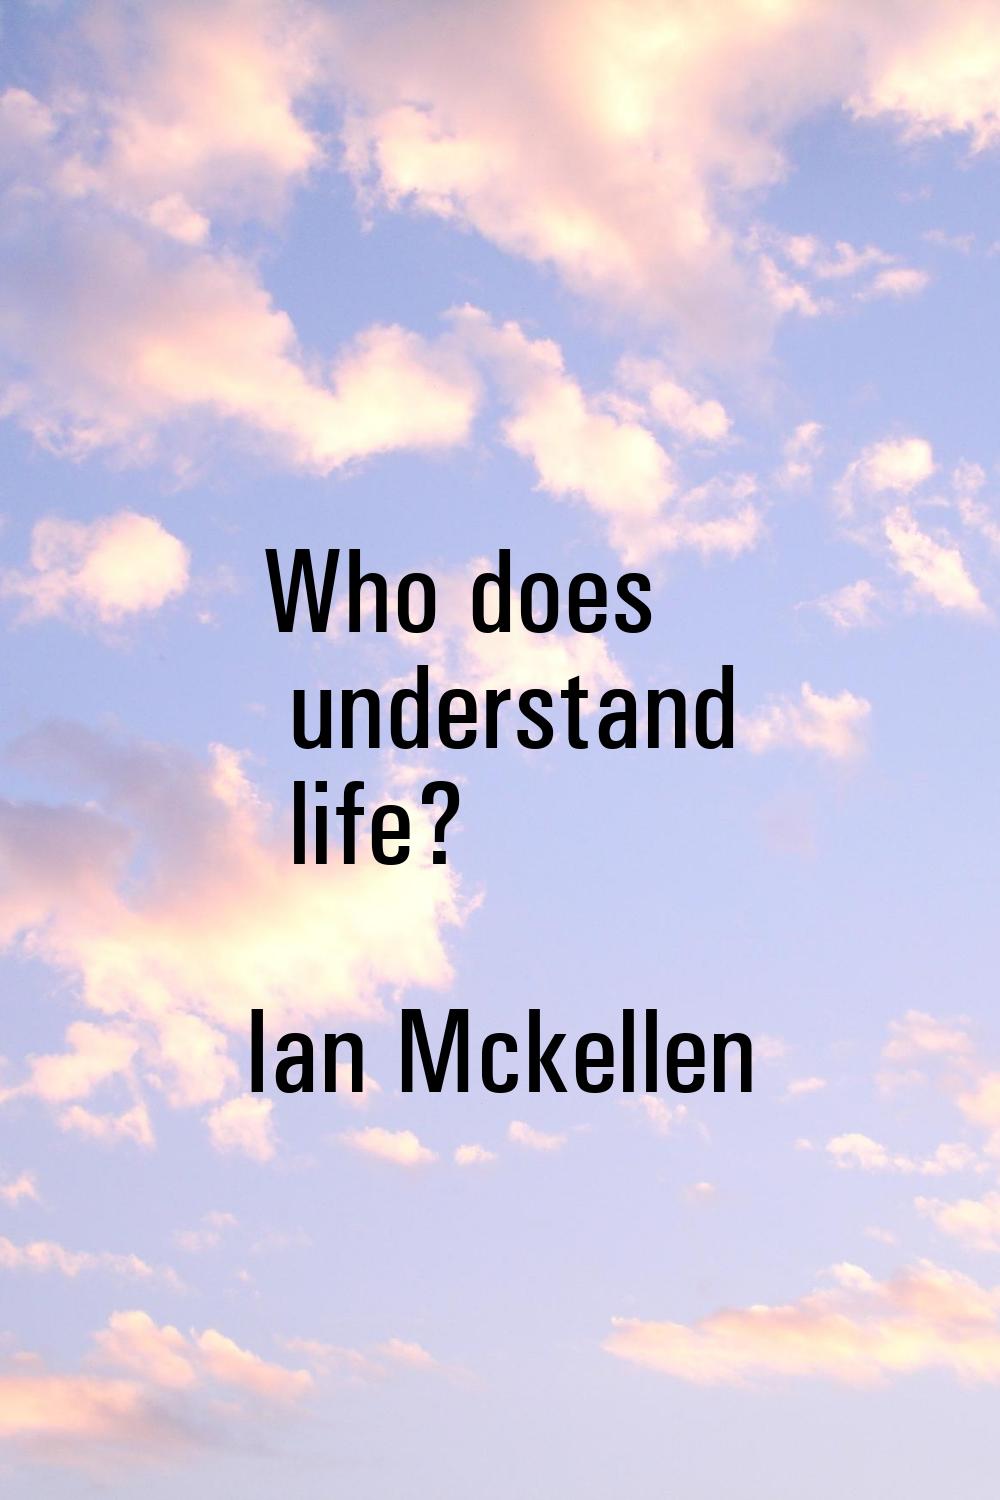 Who does understand life?